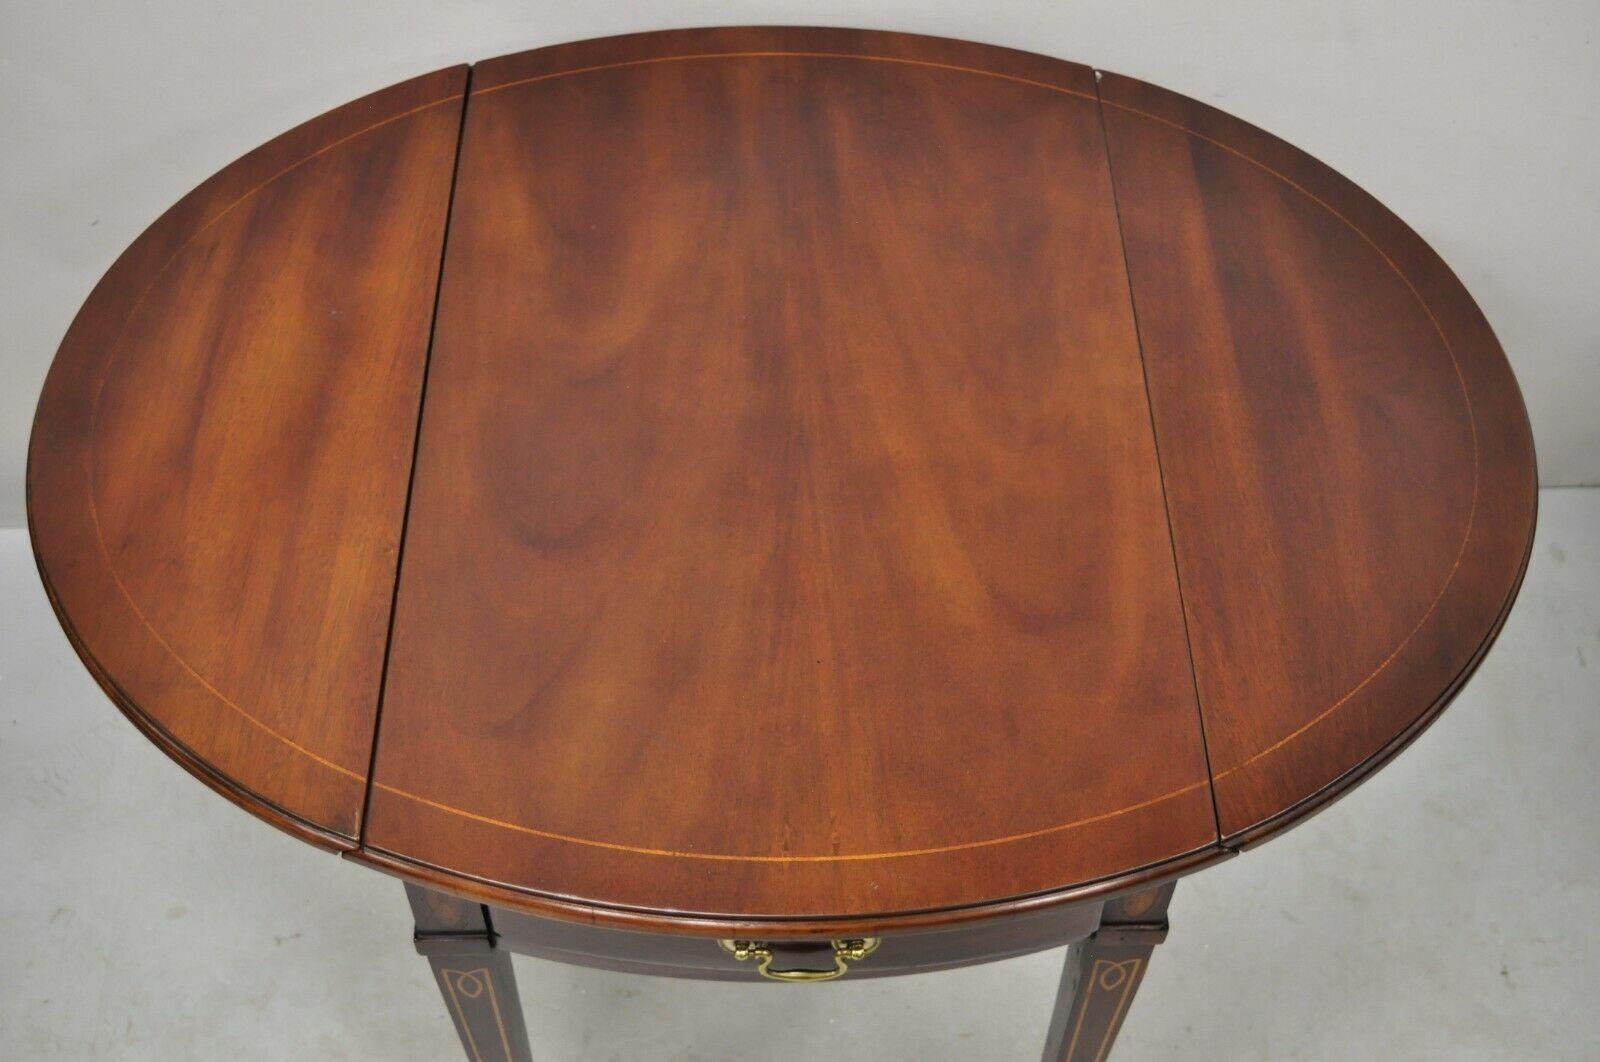 20th Century Federal Sheraton Mahogany Pembroke Side Table with Inlay by Hammary, a Pair